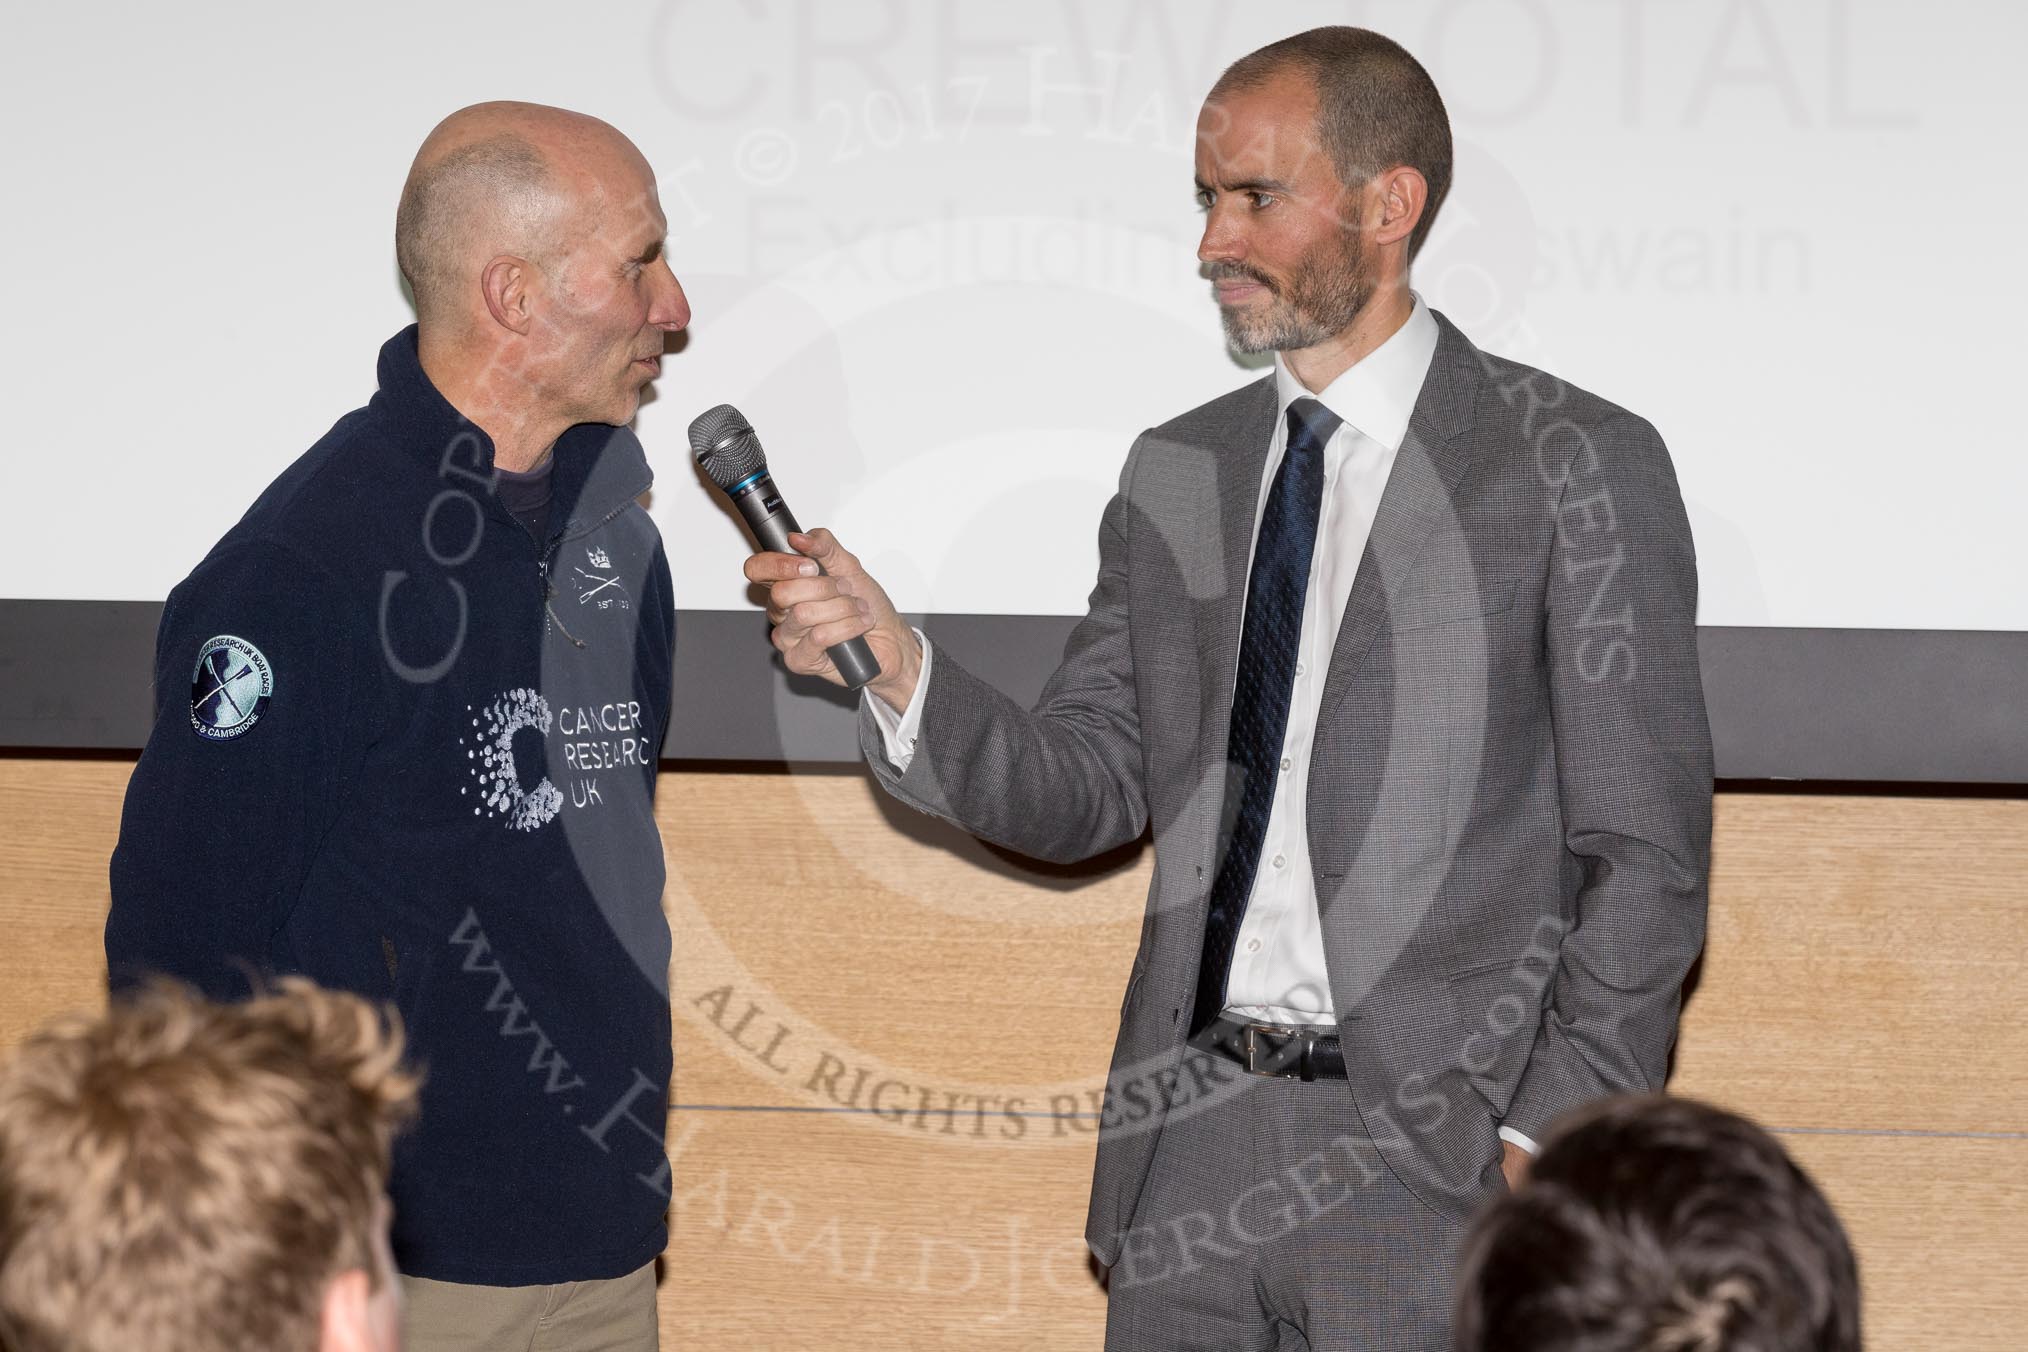 The Boat Race season 2017 - Crew Announcement and Weigh-In: OUBC Head Coach Sean Bowden with BBC Sport commentator Andrew Cotter.
The Francis Crick Institute,
London NW1,

United Kingdom,
on 14 March 2017 at 11:44, image #115